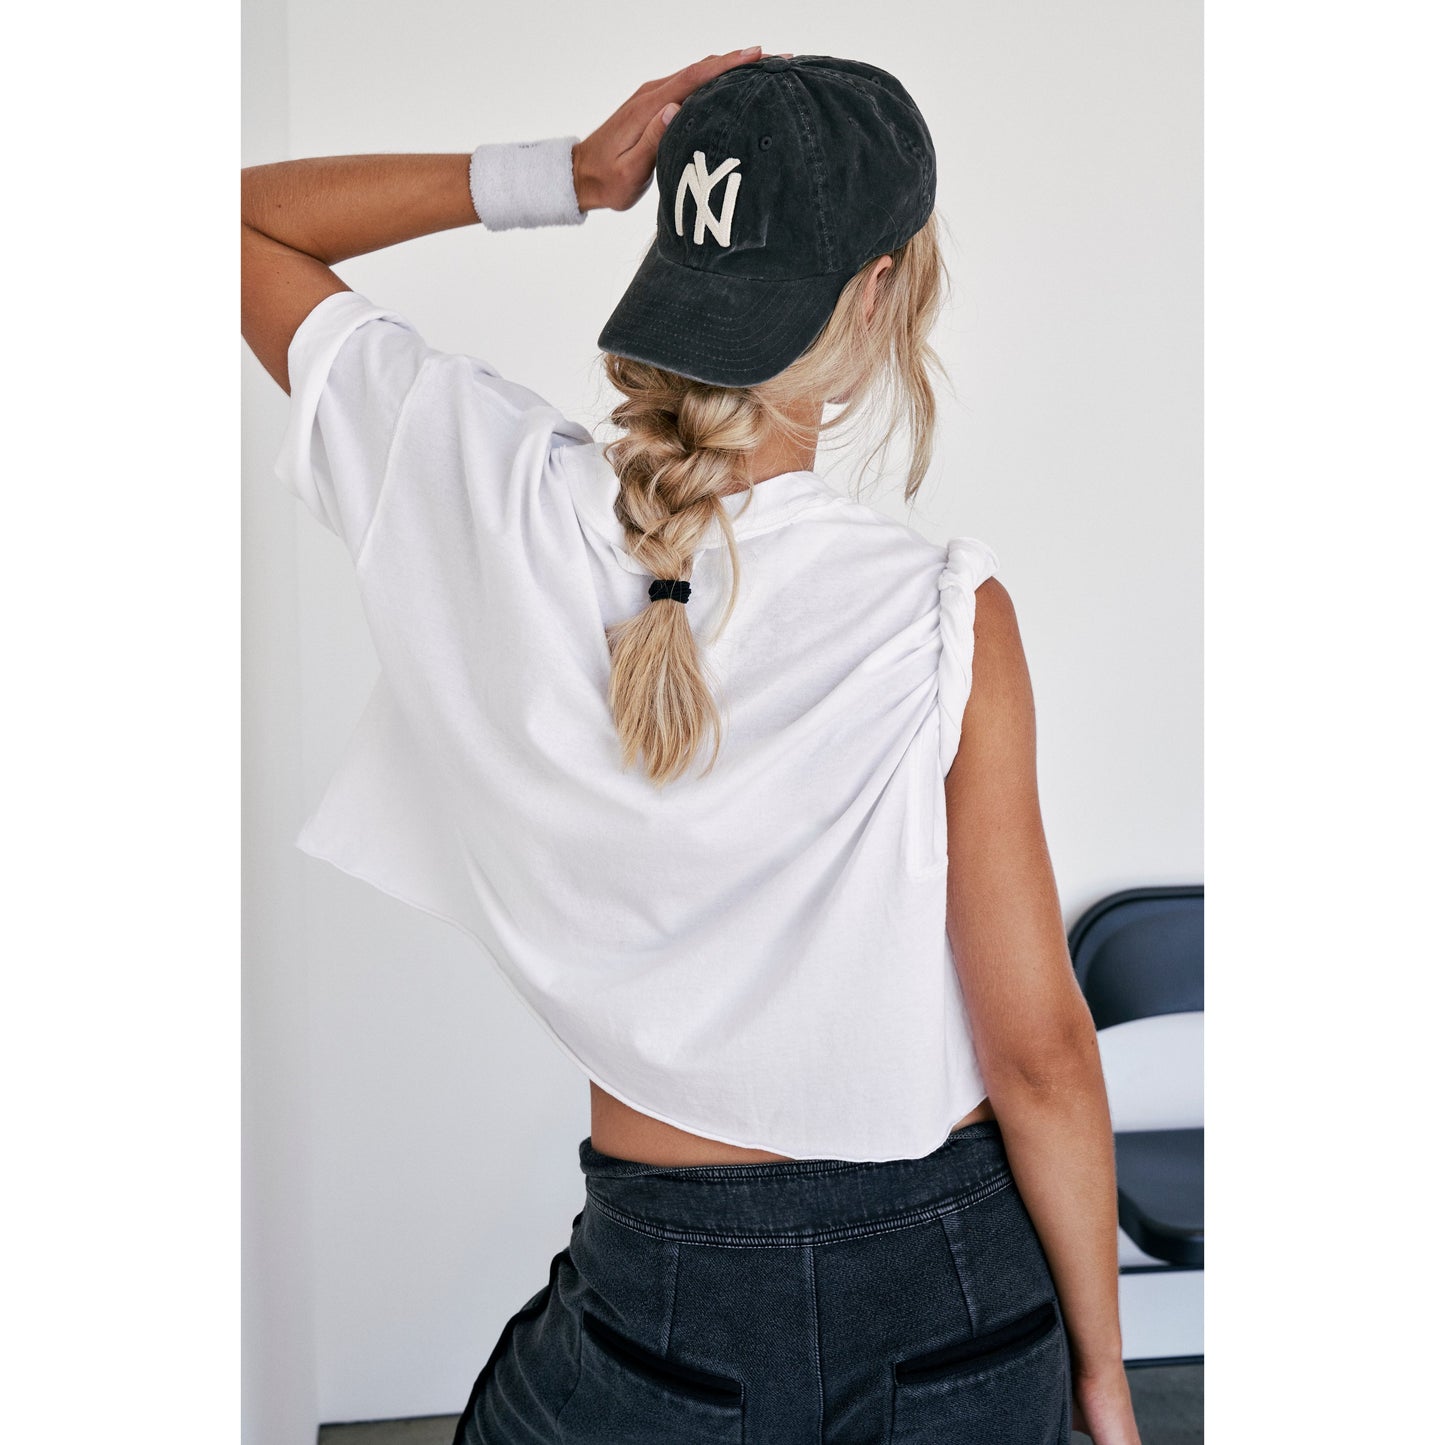 Woman from behind wearing a black NY cap and white oversized boxy fit Free People Movement Inspire Tee knotted at the waist, having a ponytail. Black jeans visible.